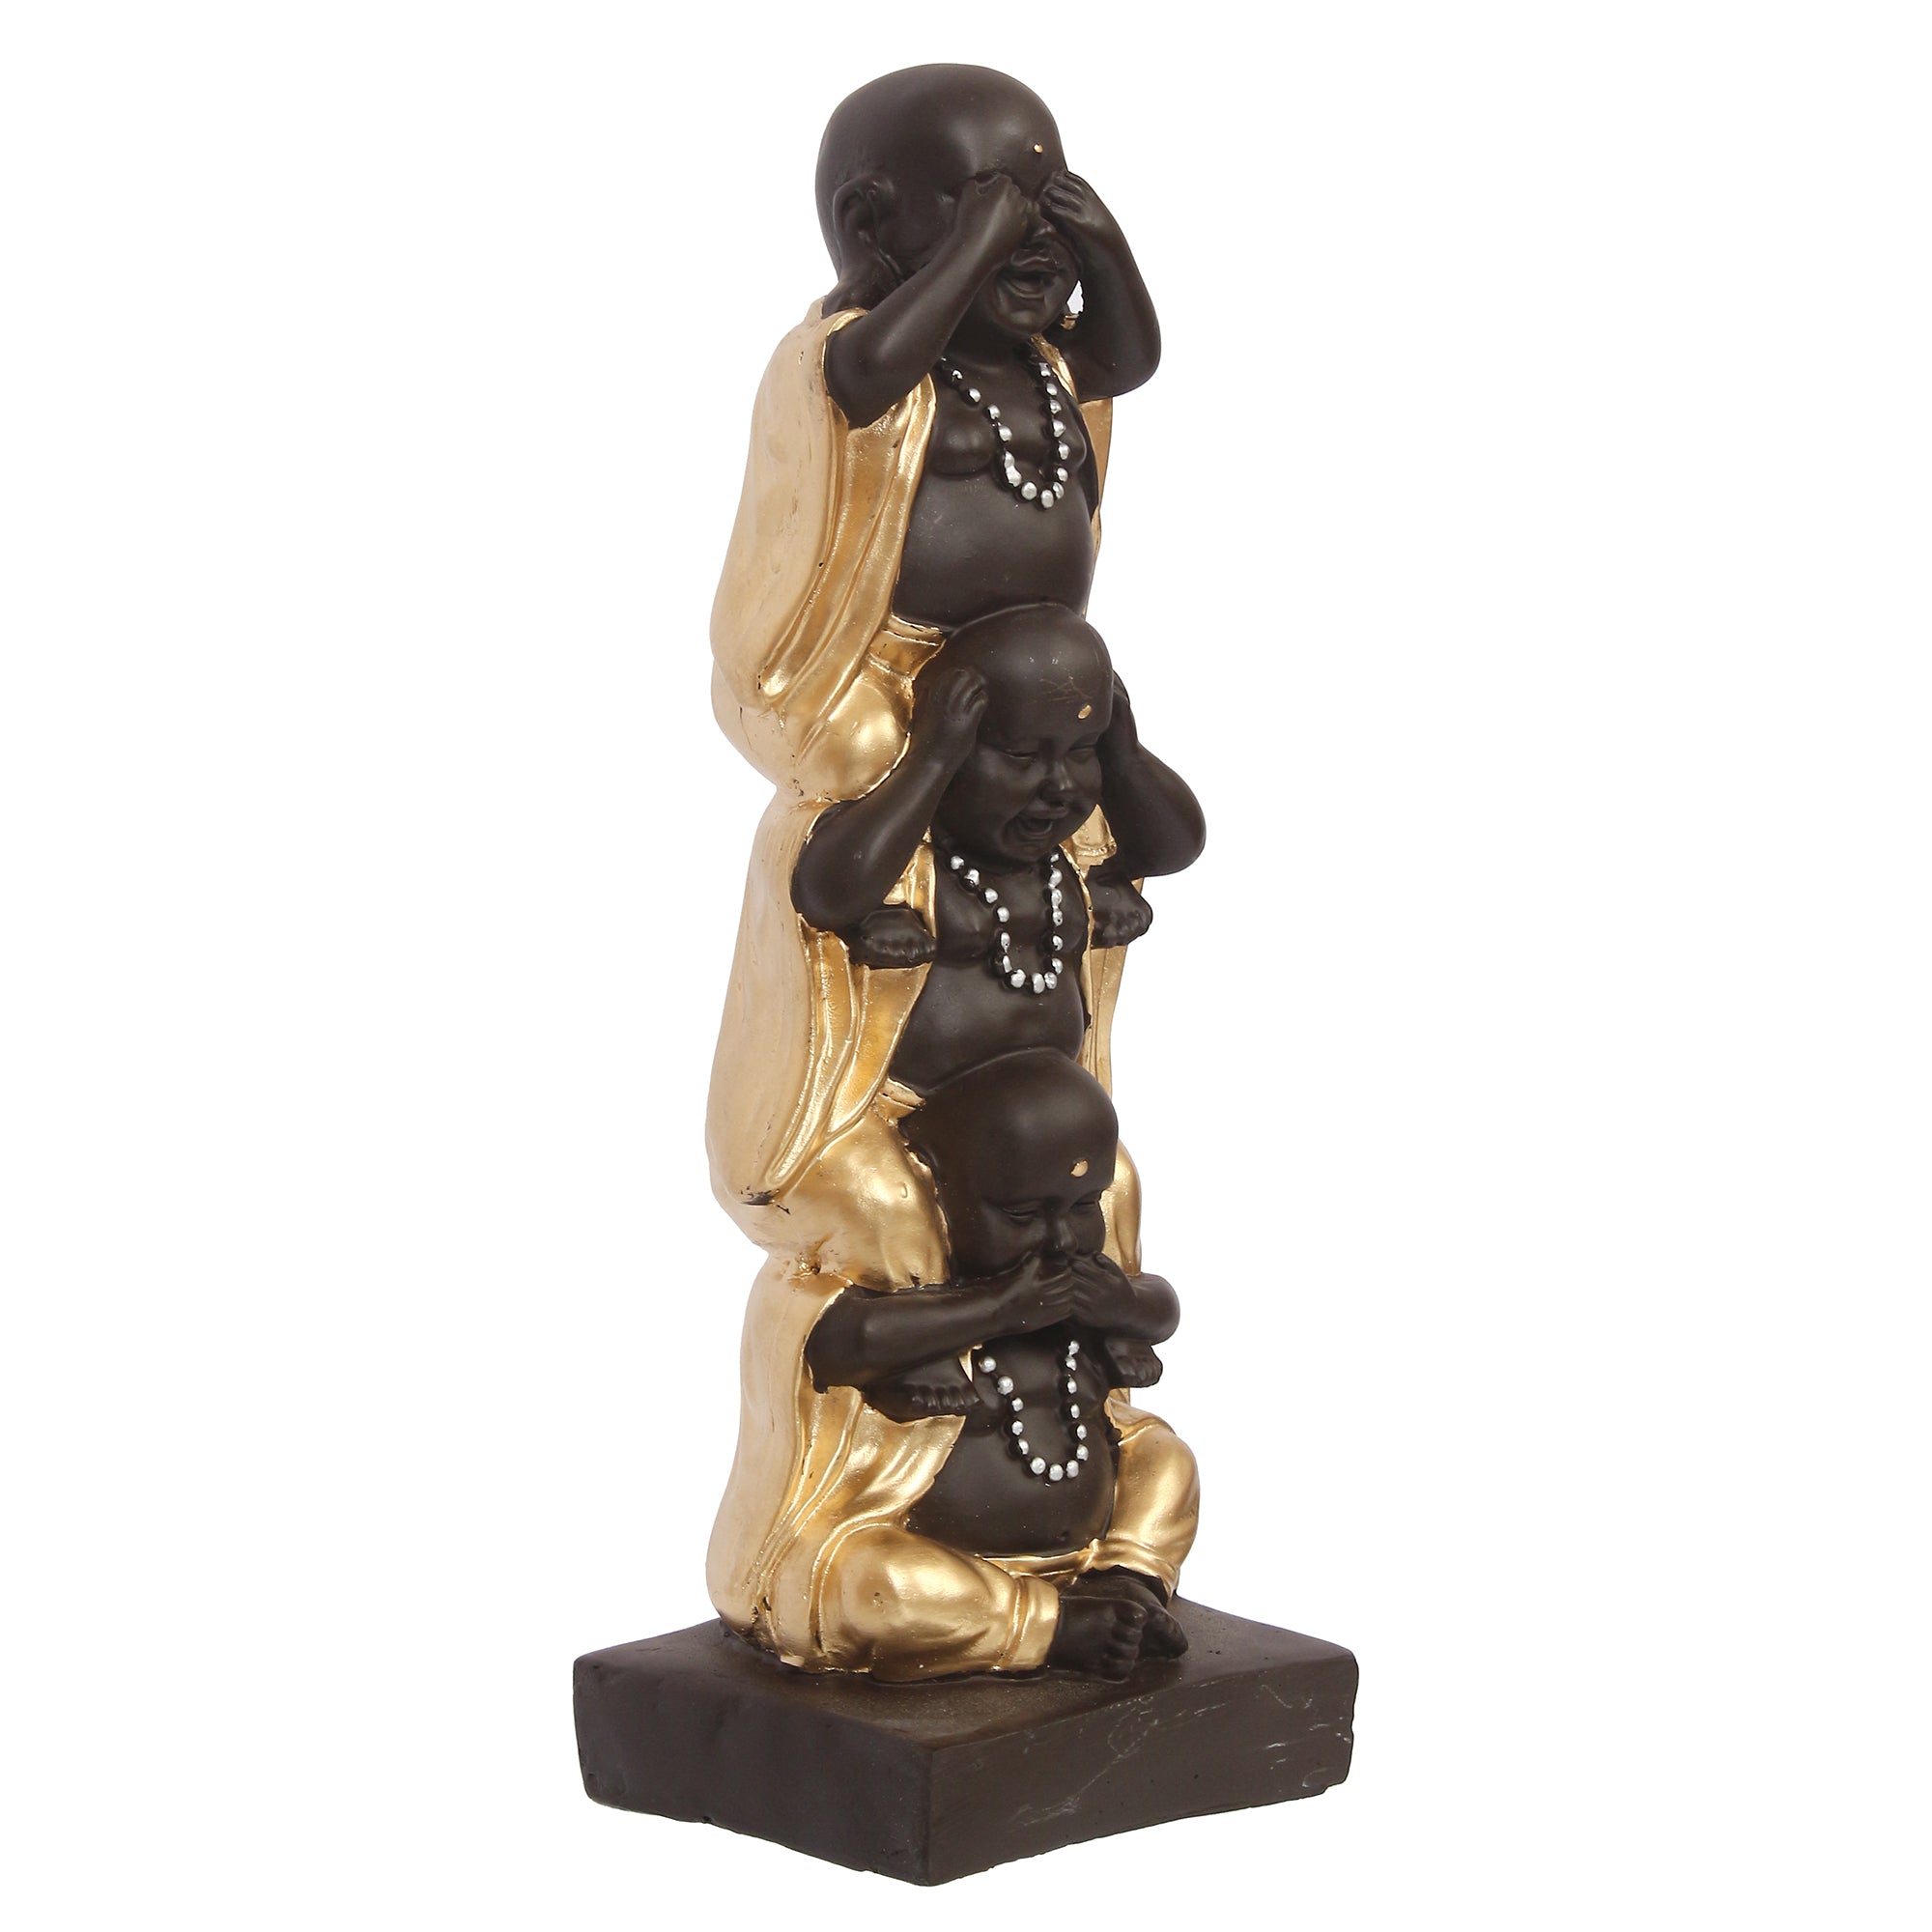 Polyresin Black and Golden Set of 3 Laughing Buddha Statue Standing on each other Decorative Showpiece 3